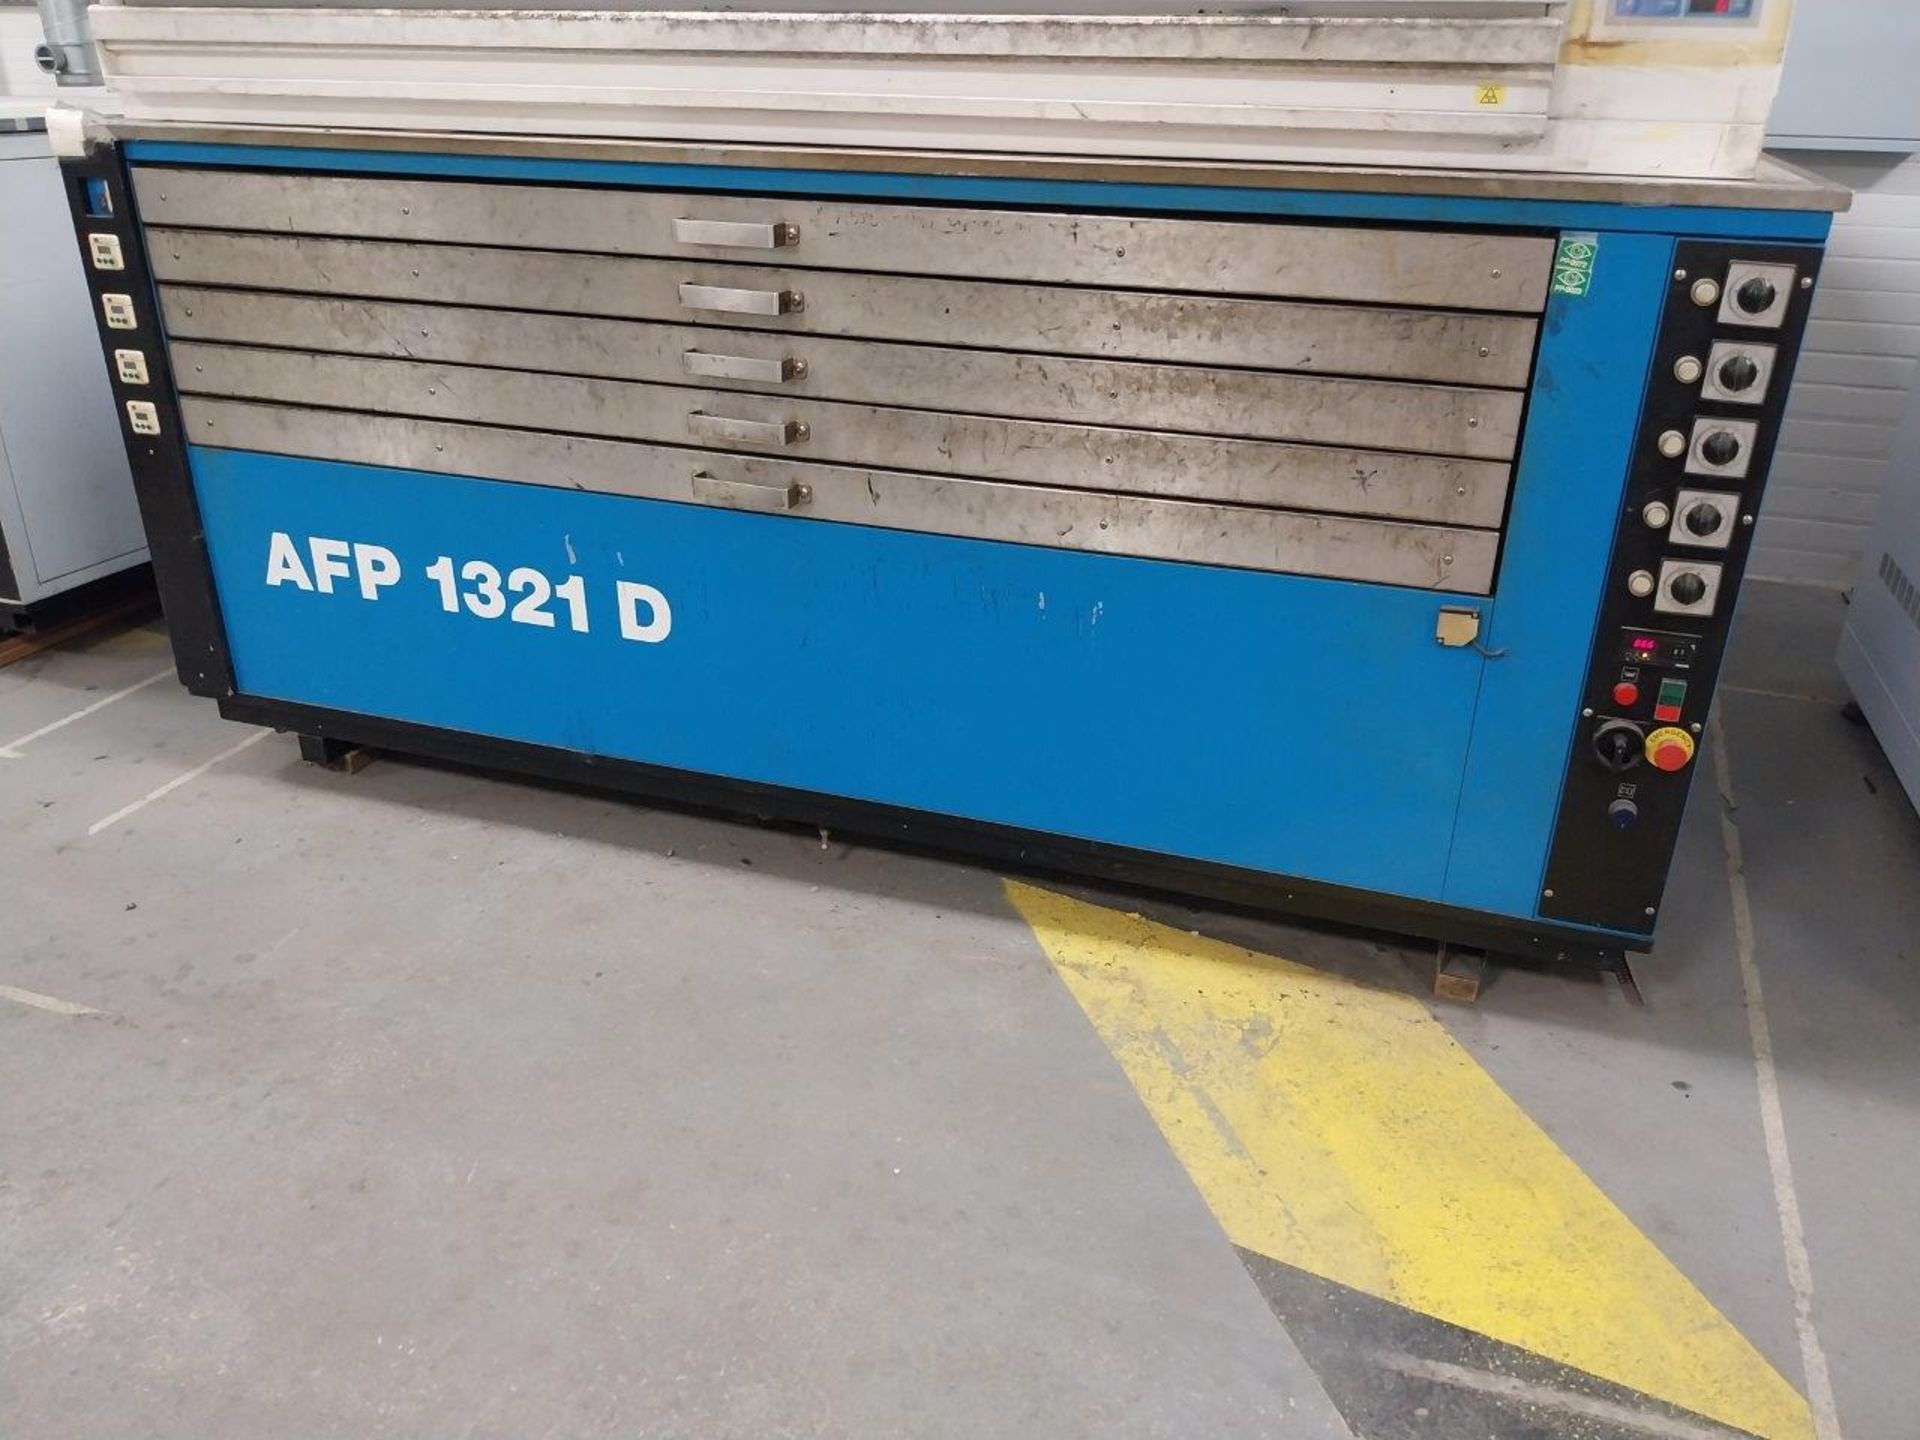 Photomeca AFP1321D 5 drawer drying unit, Serial number 95022, kw:6.5, Mfr date 07/95